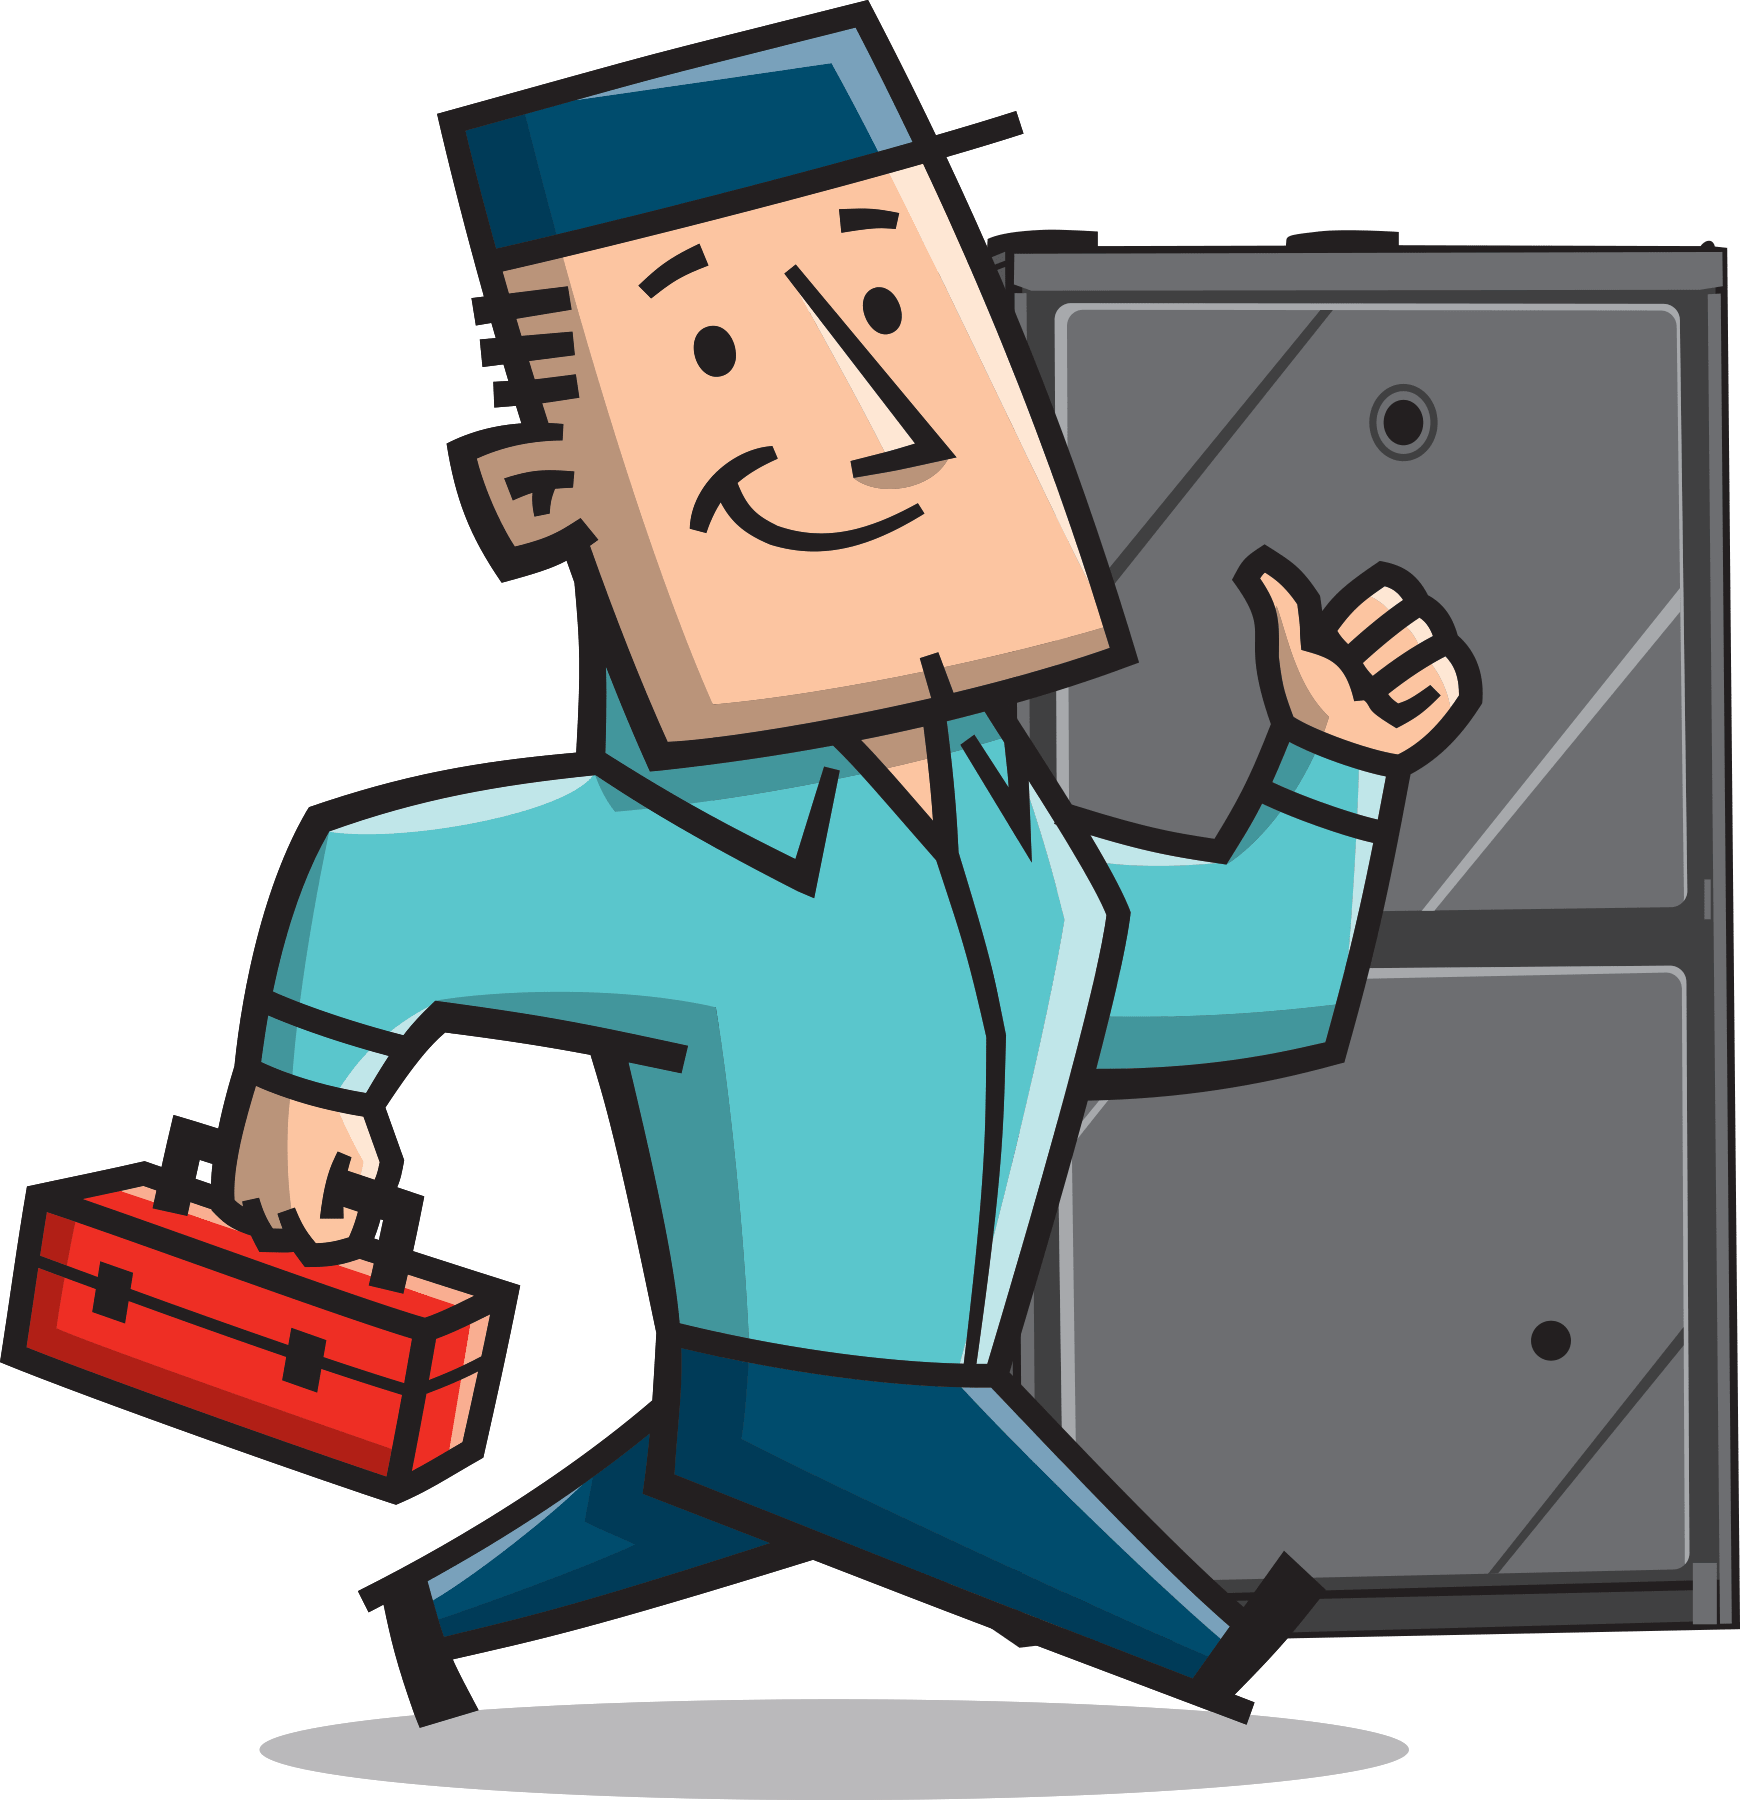 furnace replacement, heating system replacement, heating system installation, furnace installation in Plainfield IL, Naperville IL, and Romeoville IL.